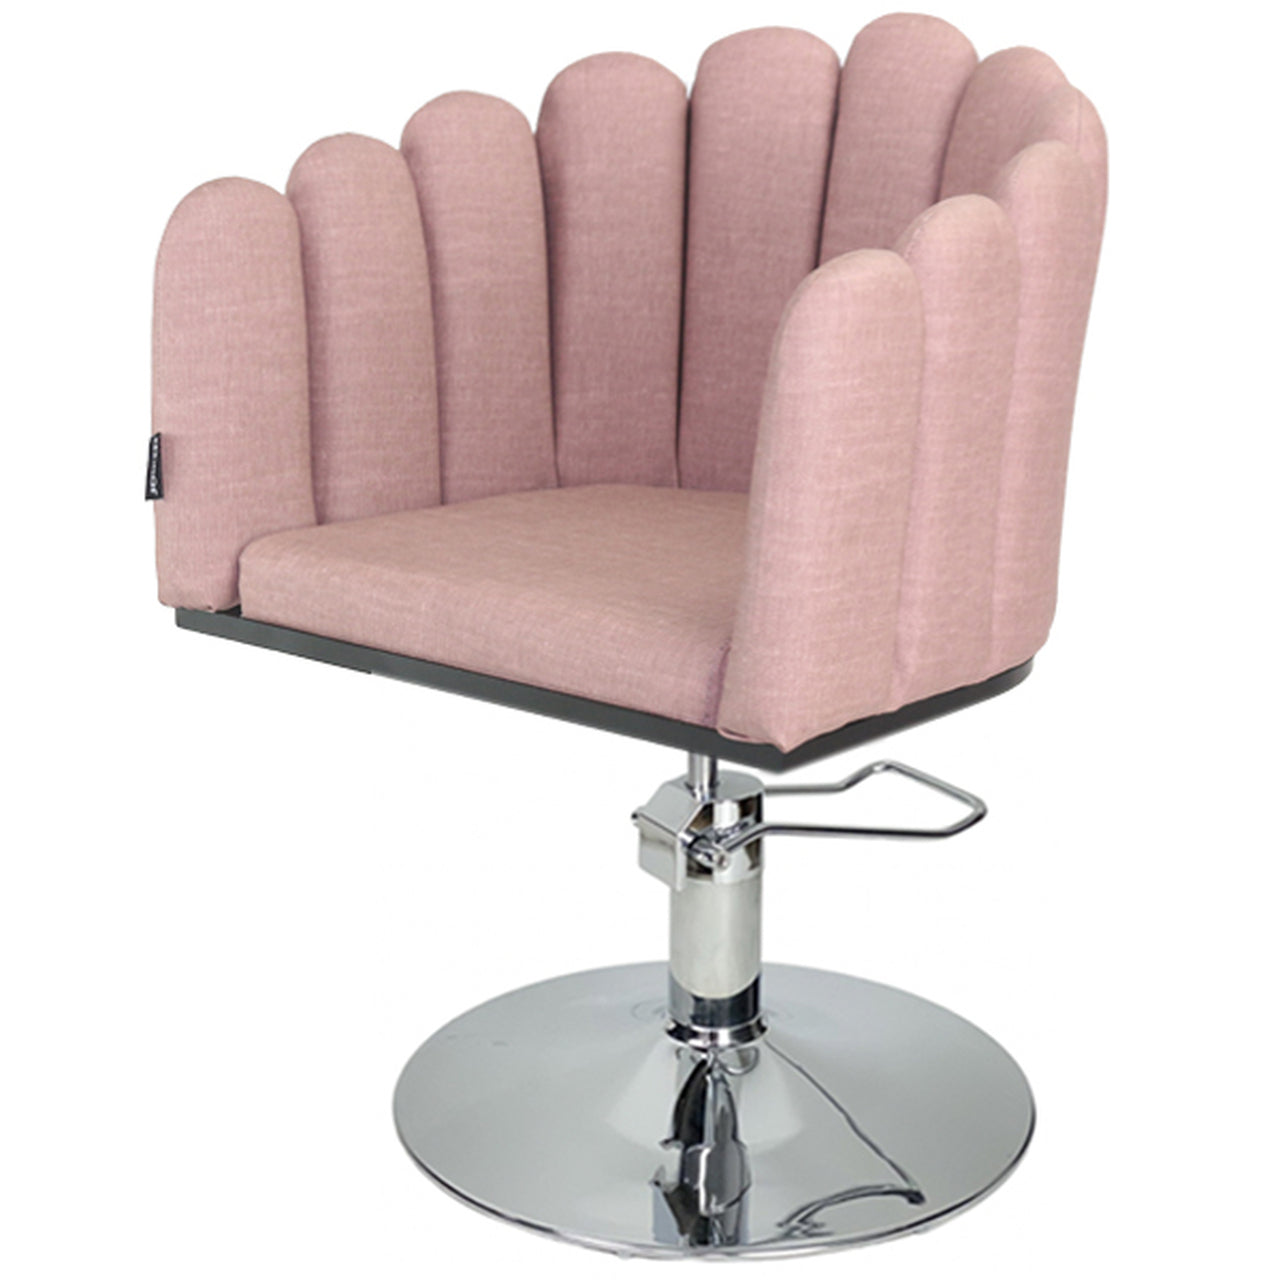 Penelope Dusty Pink Chair - CHROME Disc Hydraulic